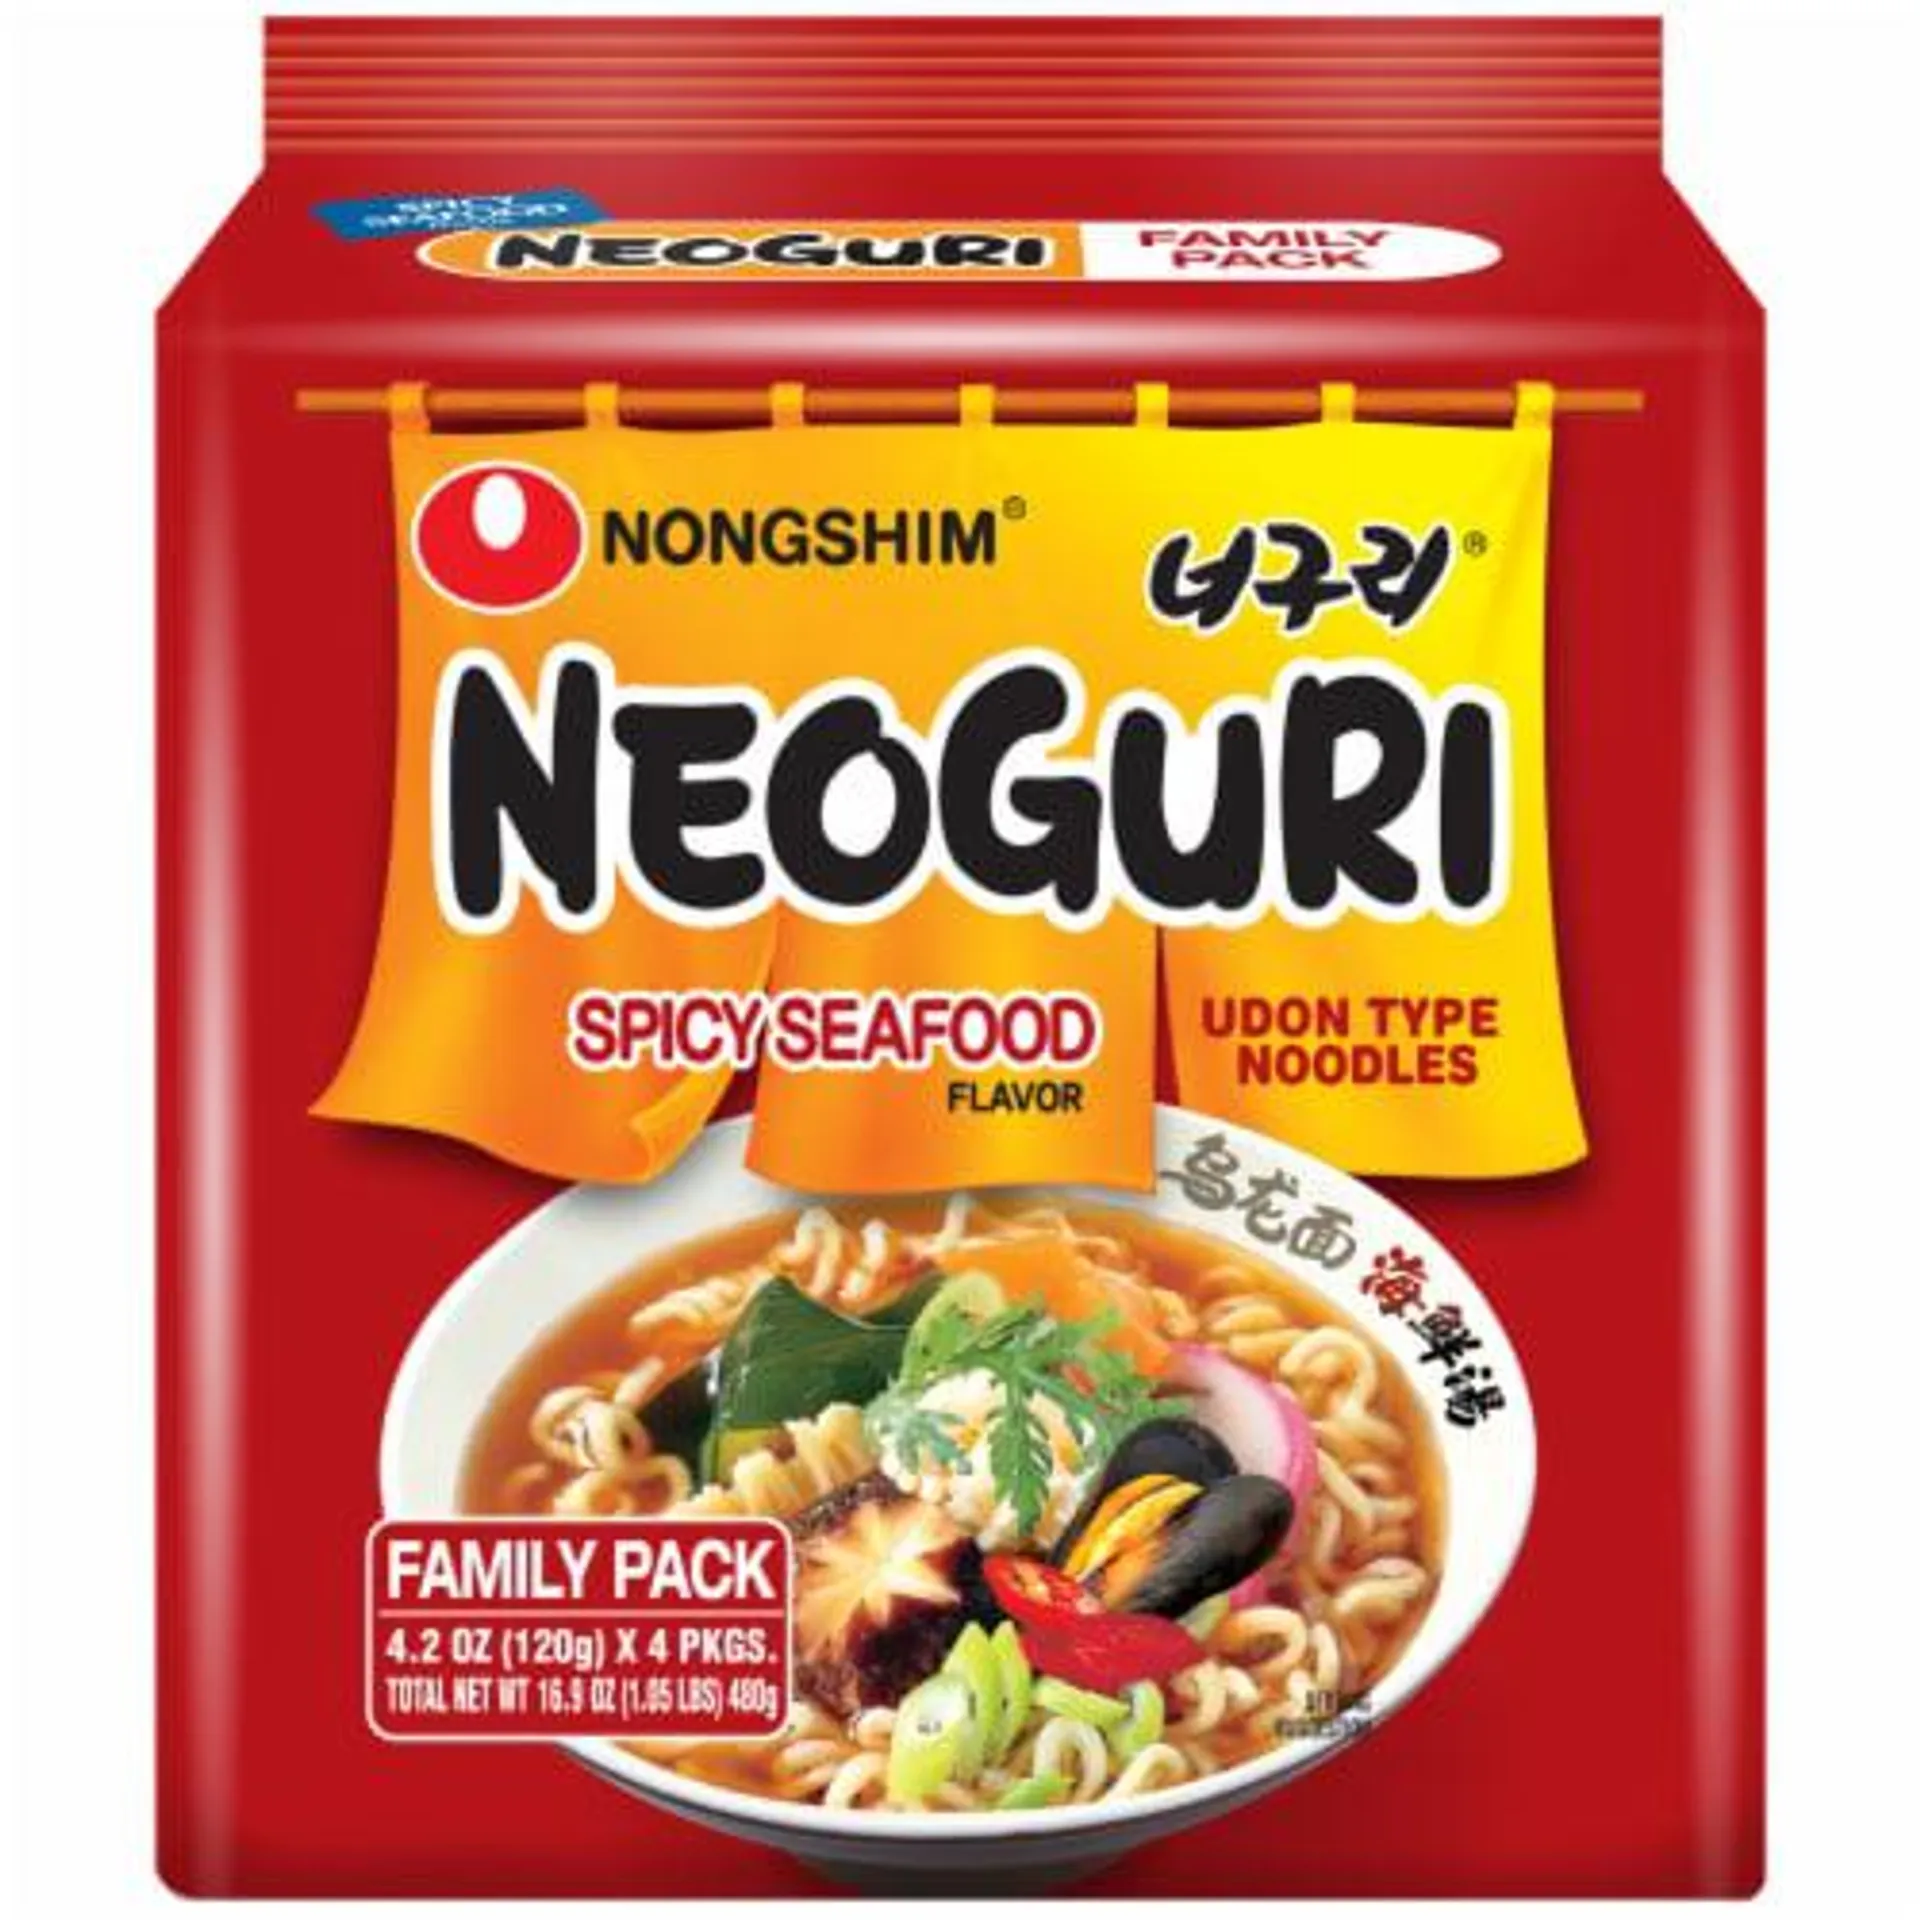 Nongshim Neoguri Spicy Seafood Flavor Family Pack